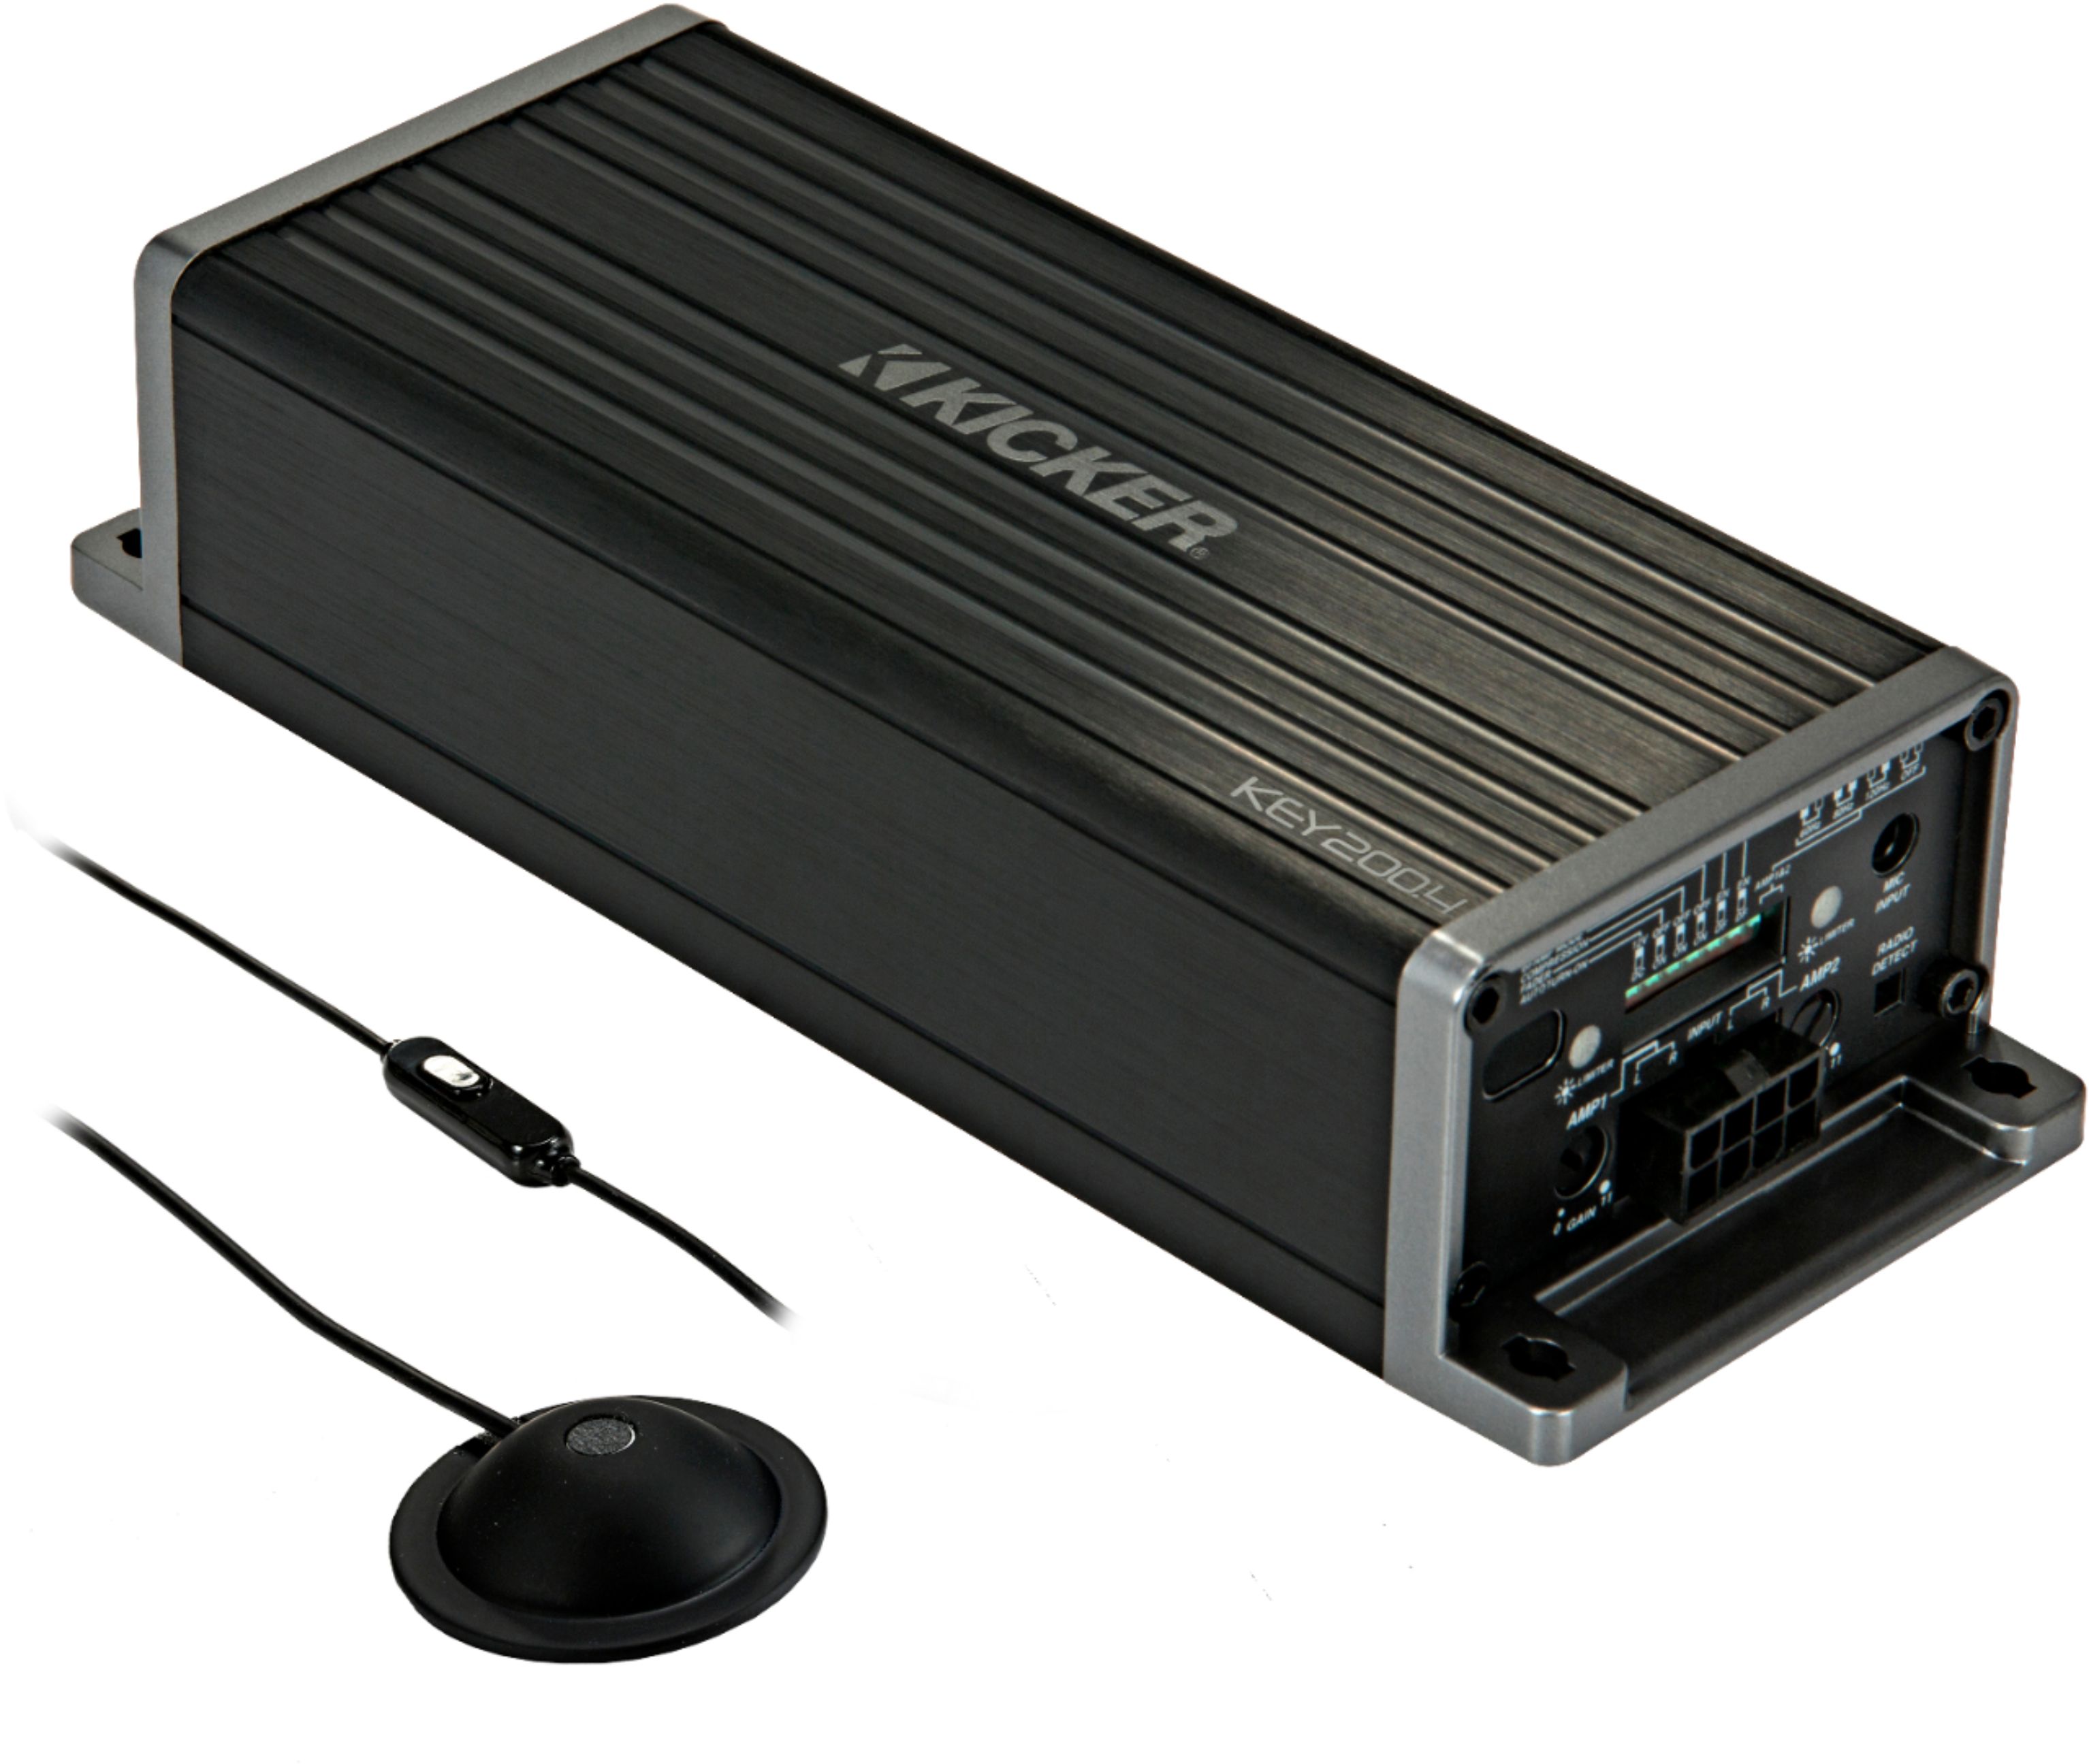 Angle View: KICKER - KEY 200W Multichannel Amplifier with High-Pass Crossover - Black